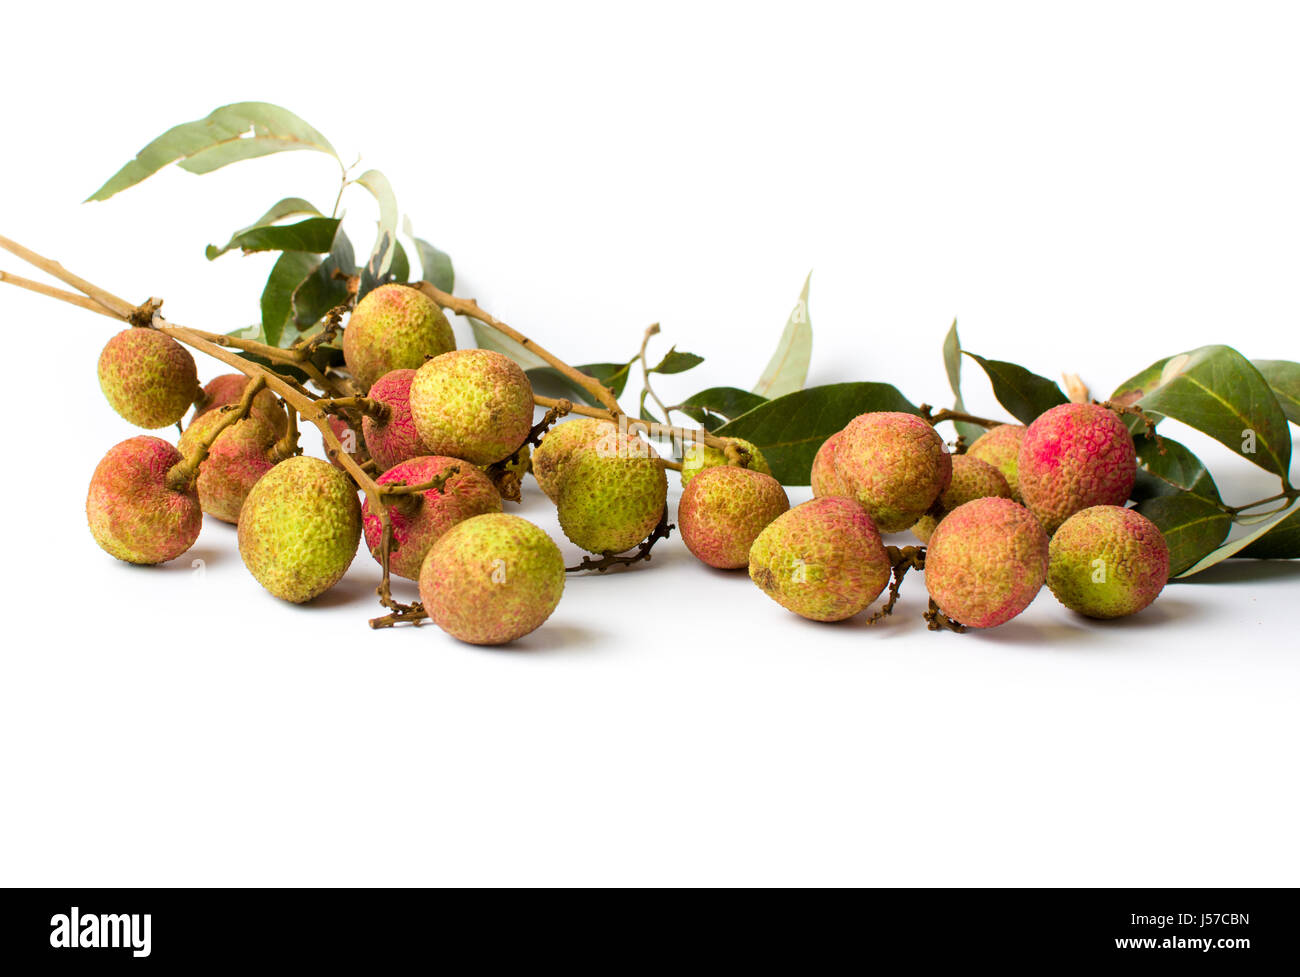 Lychee tropical fruit bouquet on white background Stock Photo